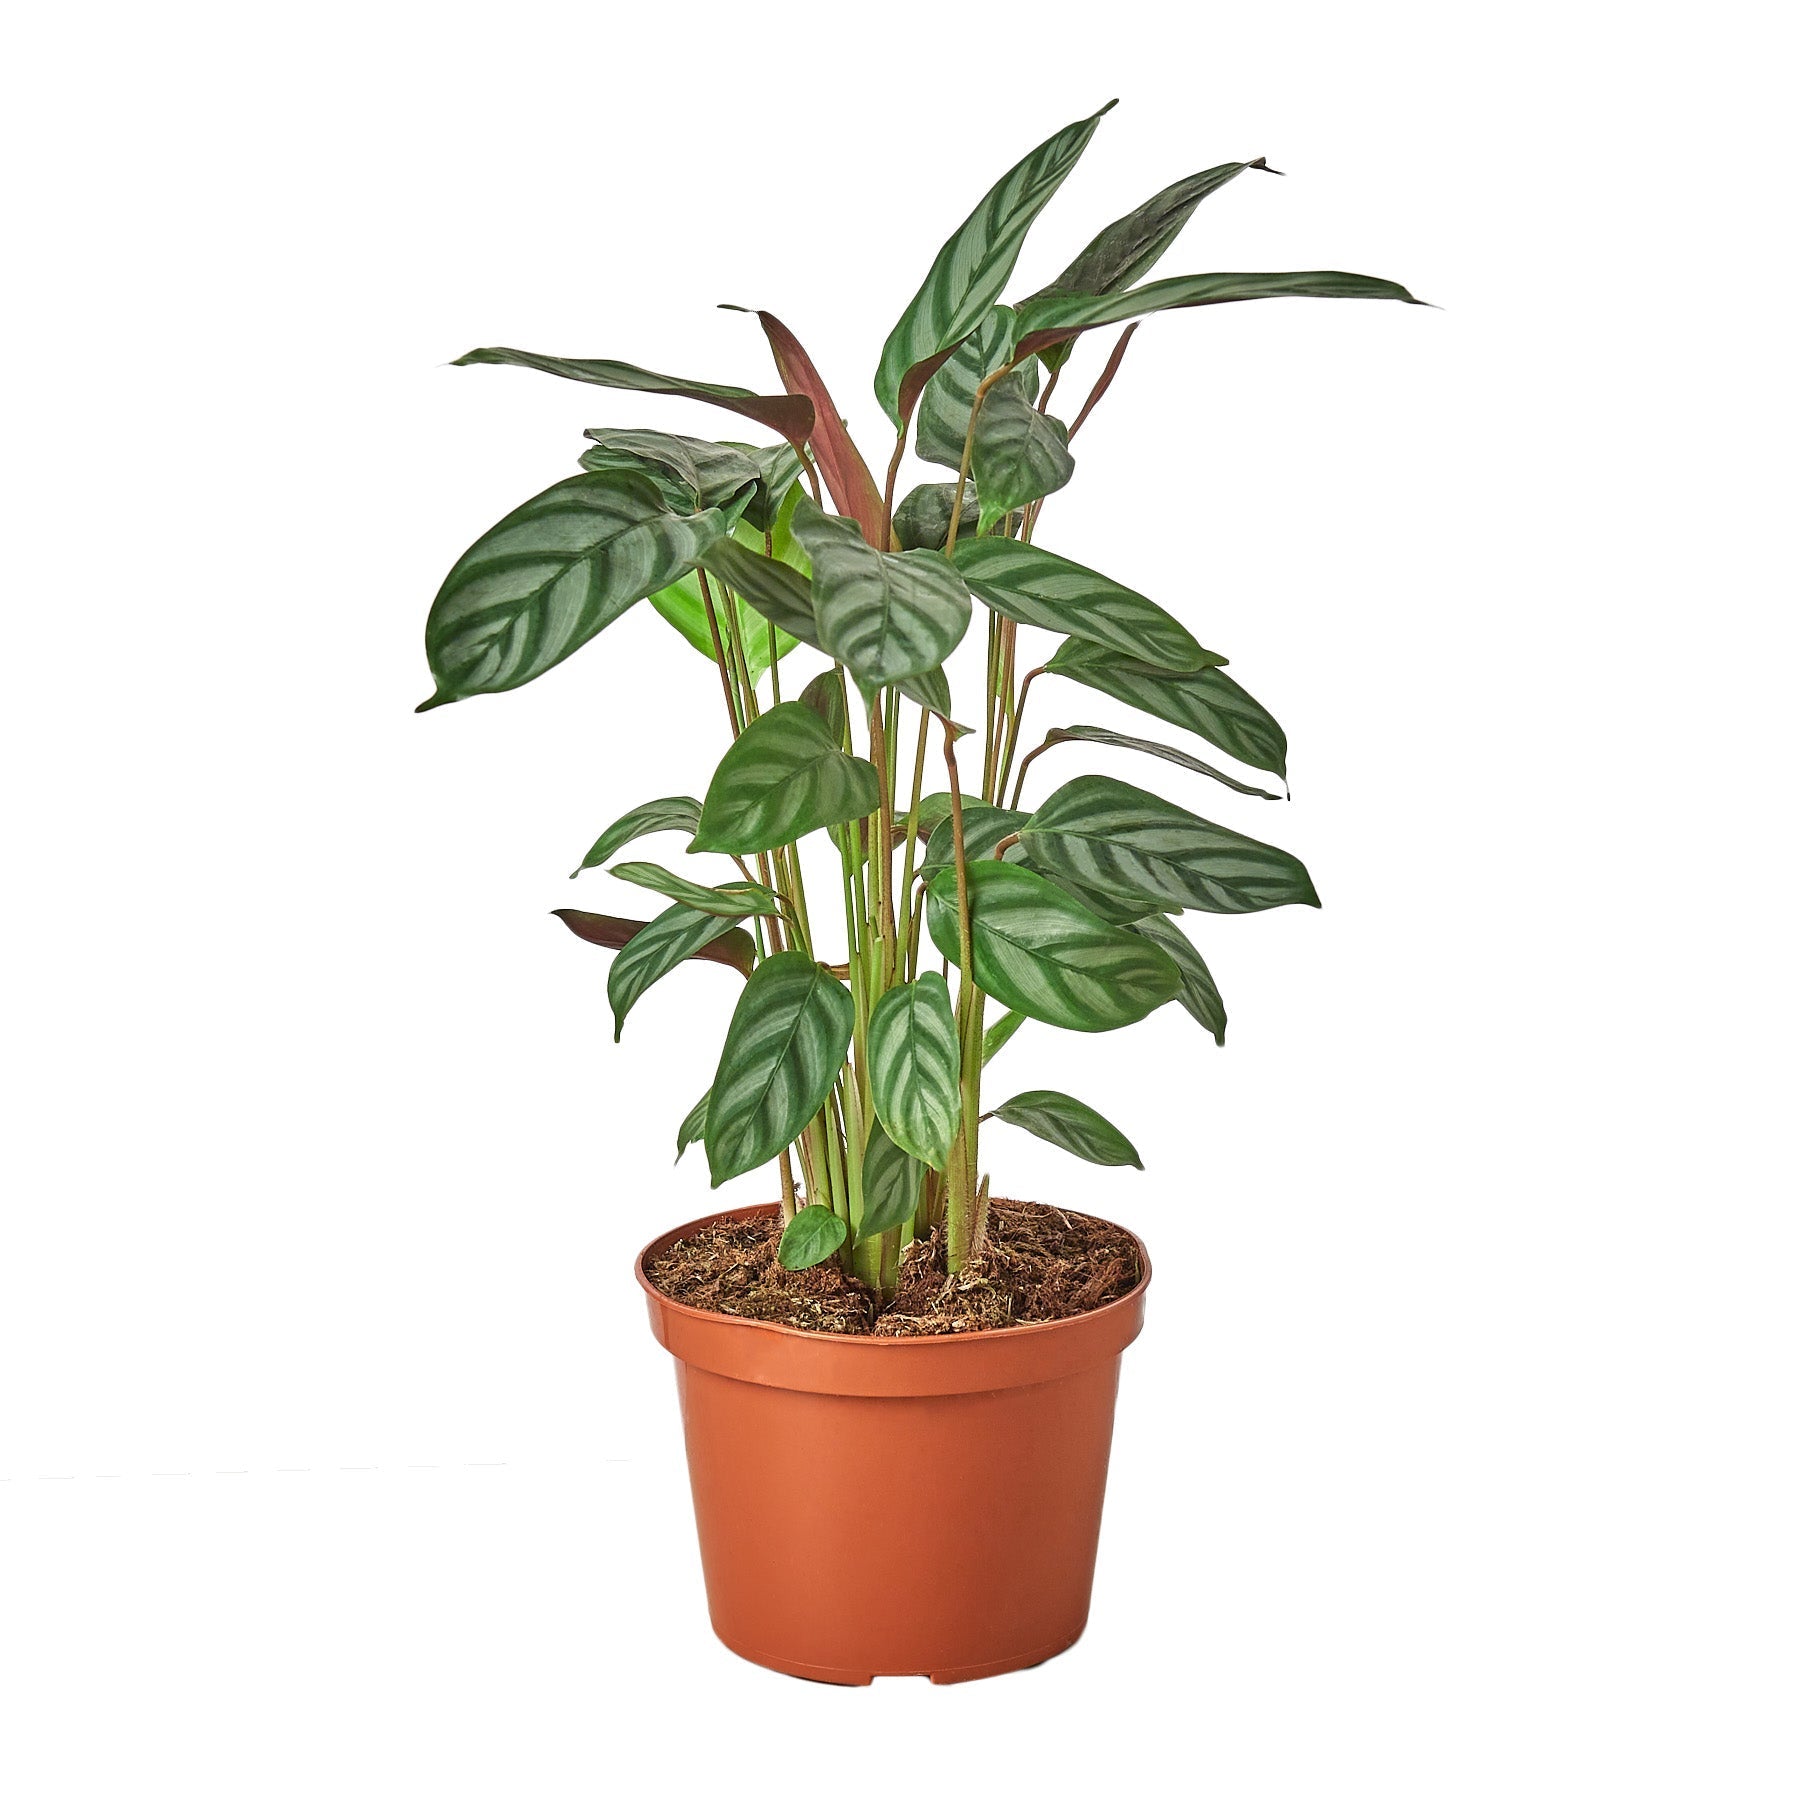 A plant in a pot on a white background, perfect for a top garden center near me.